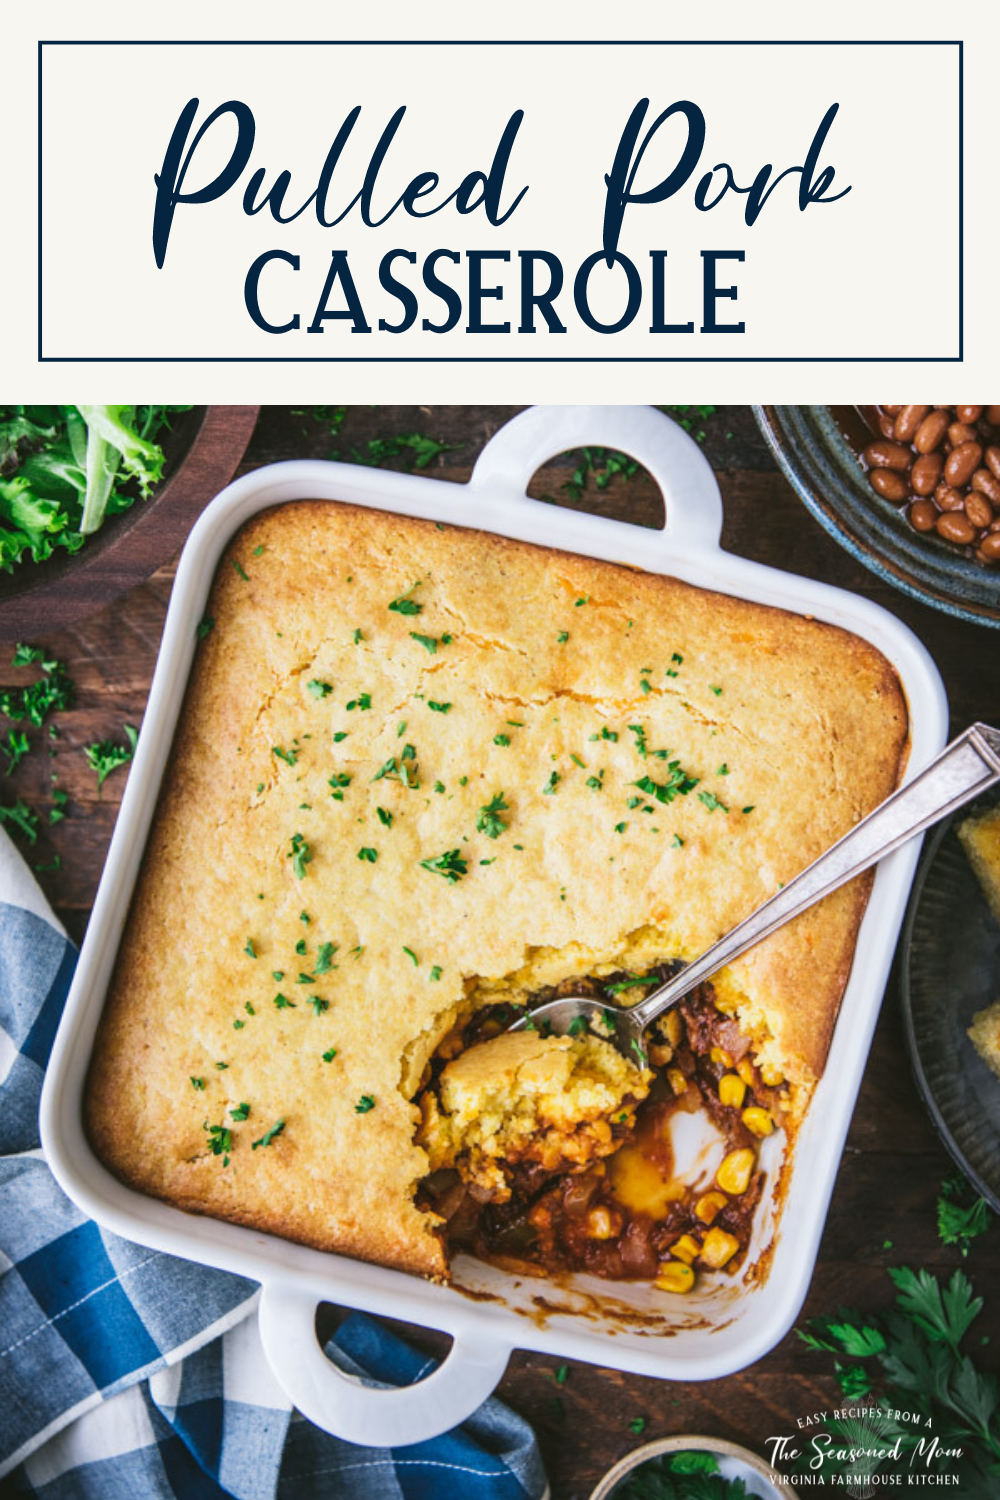 Pulled Pork Casserole with Cornbread Topping - The Seasoned Mom